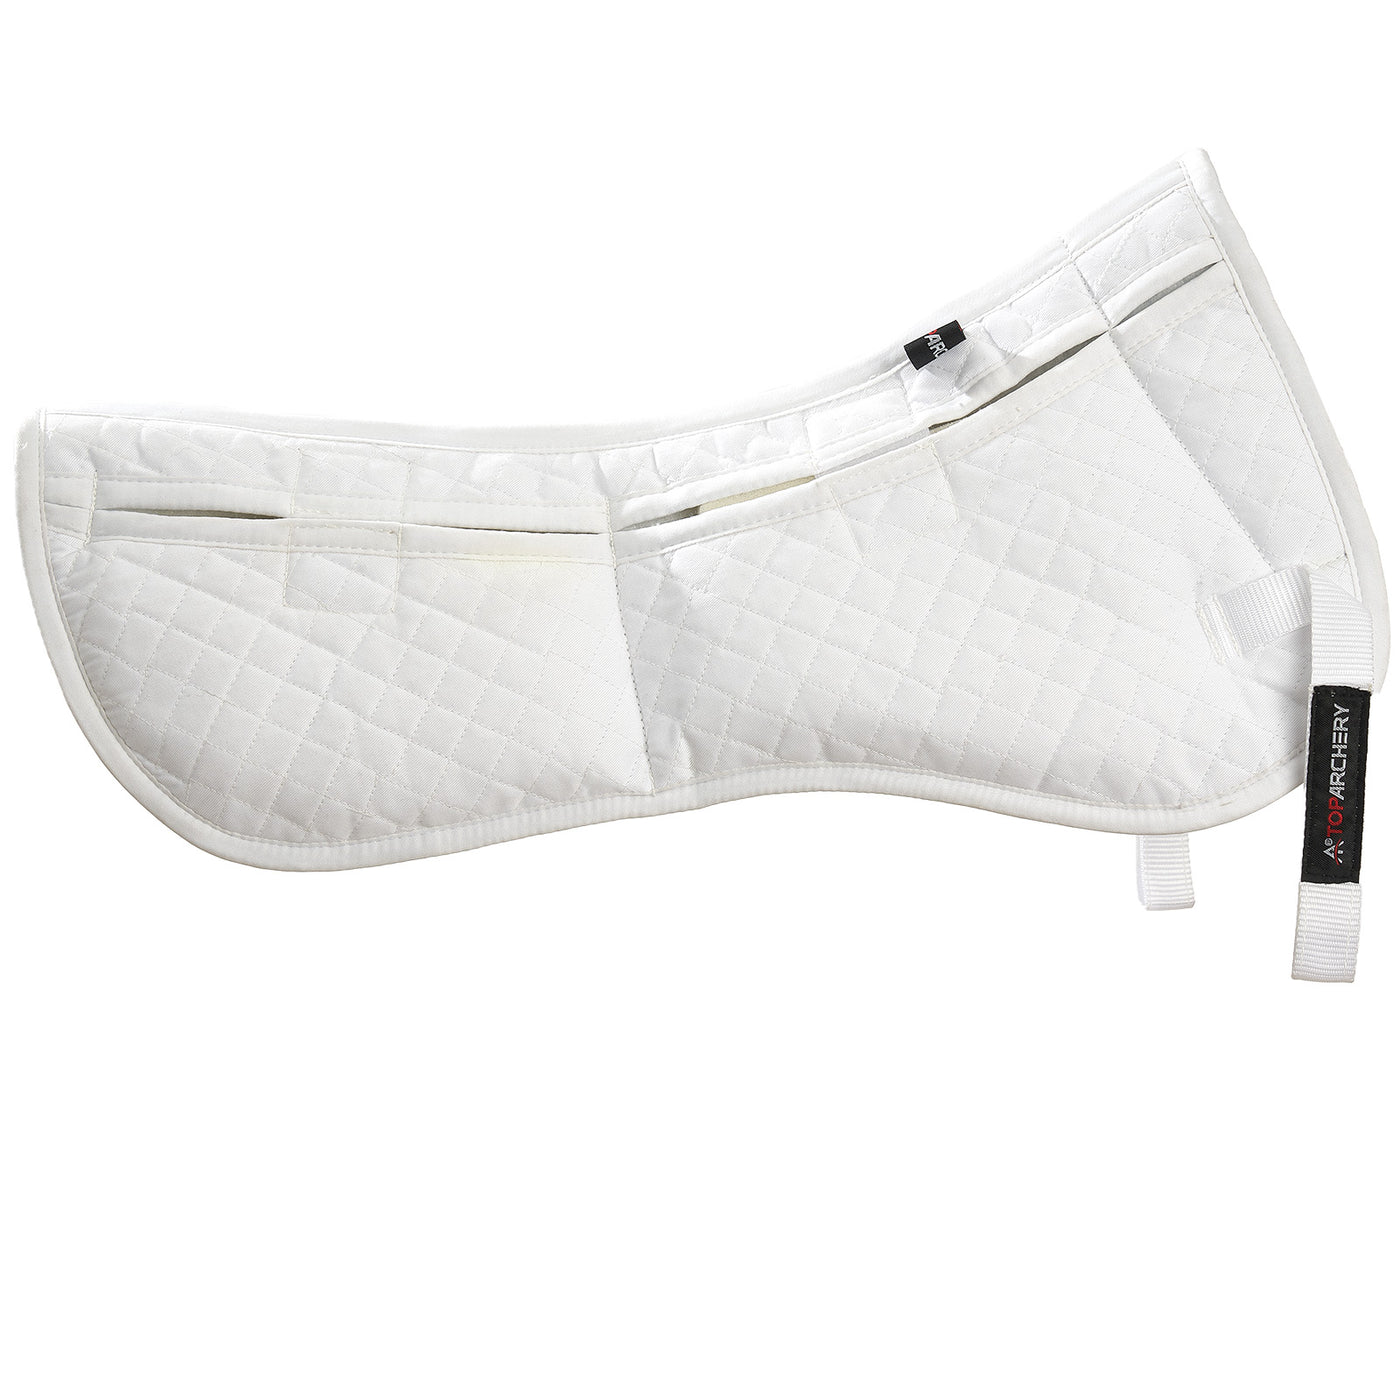 TopArchery Cotton Correction Horse Half Saddle Pad 4 Pocket with Adjustable Memory Foam Inserts